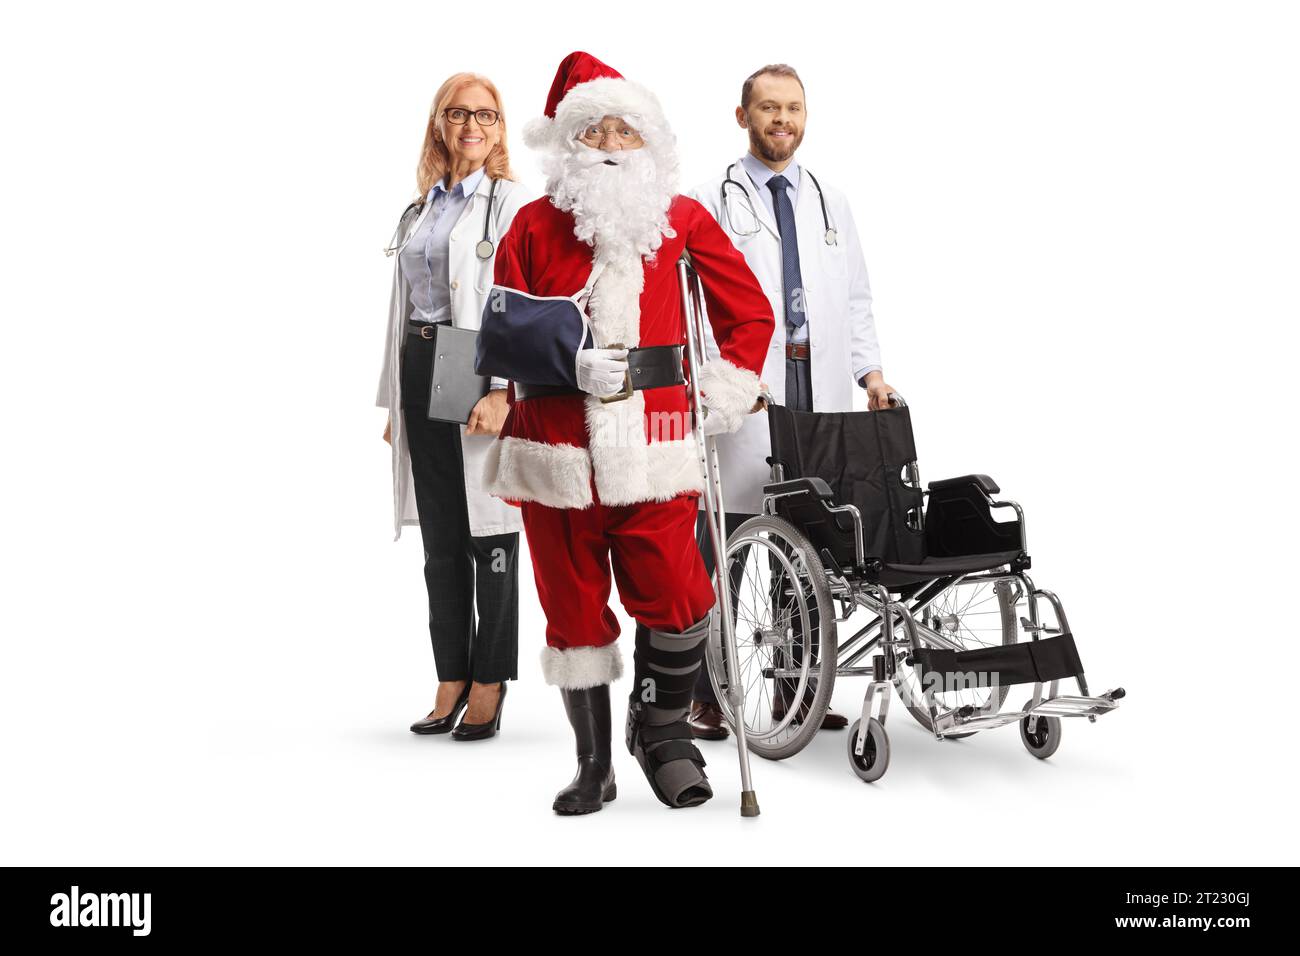 Injured santa claus with a foot brace and arm sling standing with a male and female doctors with a wheelchair isolated on white background Stock Photo